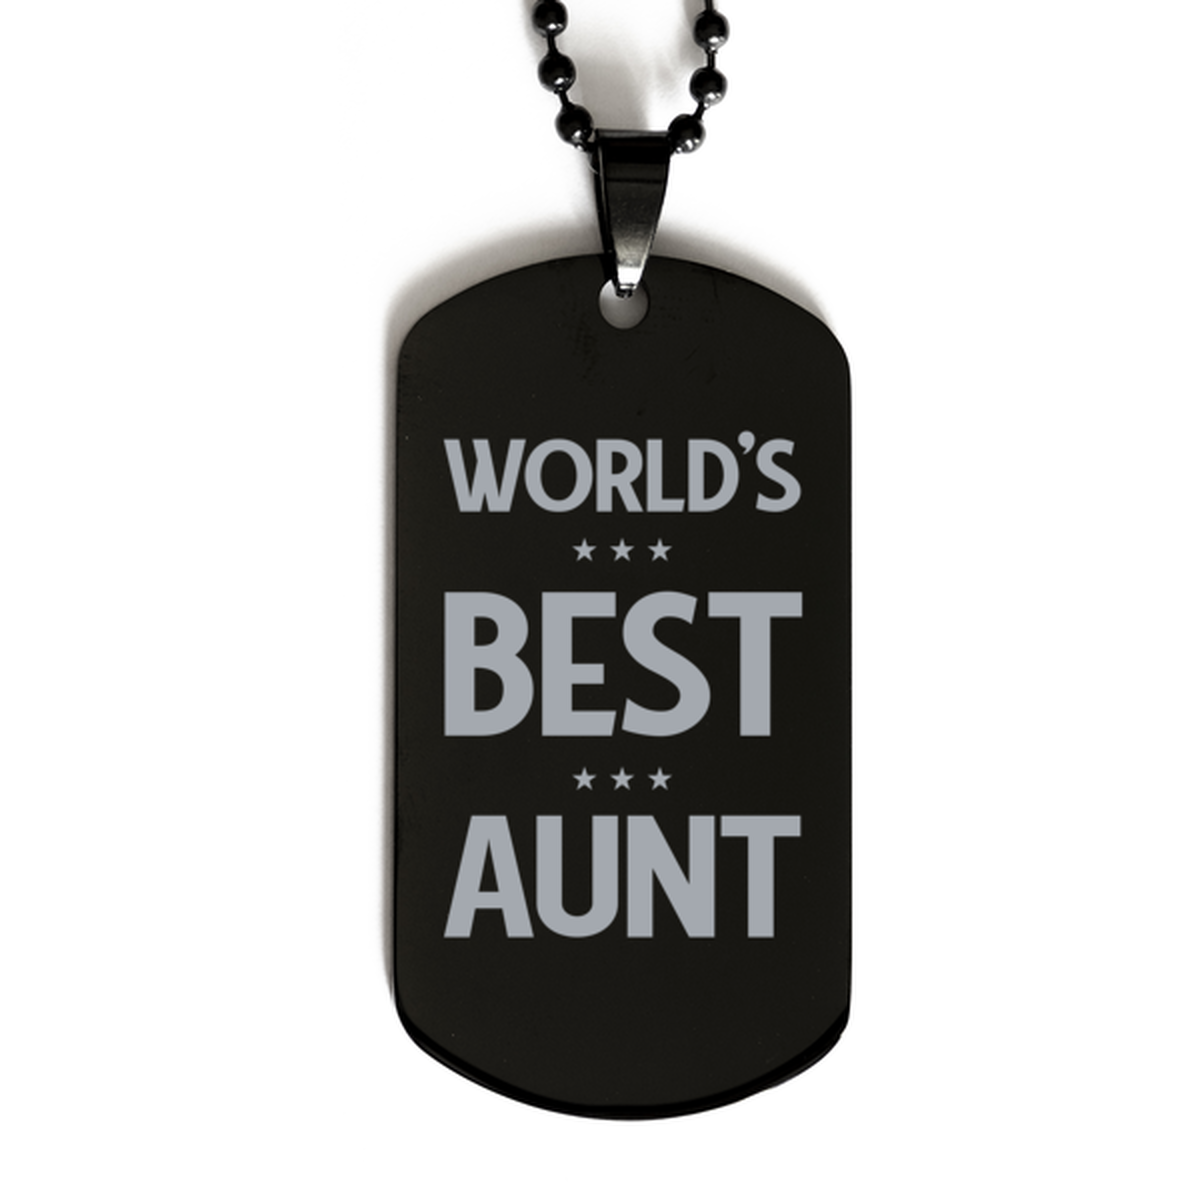 Worlds Best Aunt Gifts, Funny Black Engraved Dog Tag For Aunt, Birthday Presents For Women